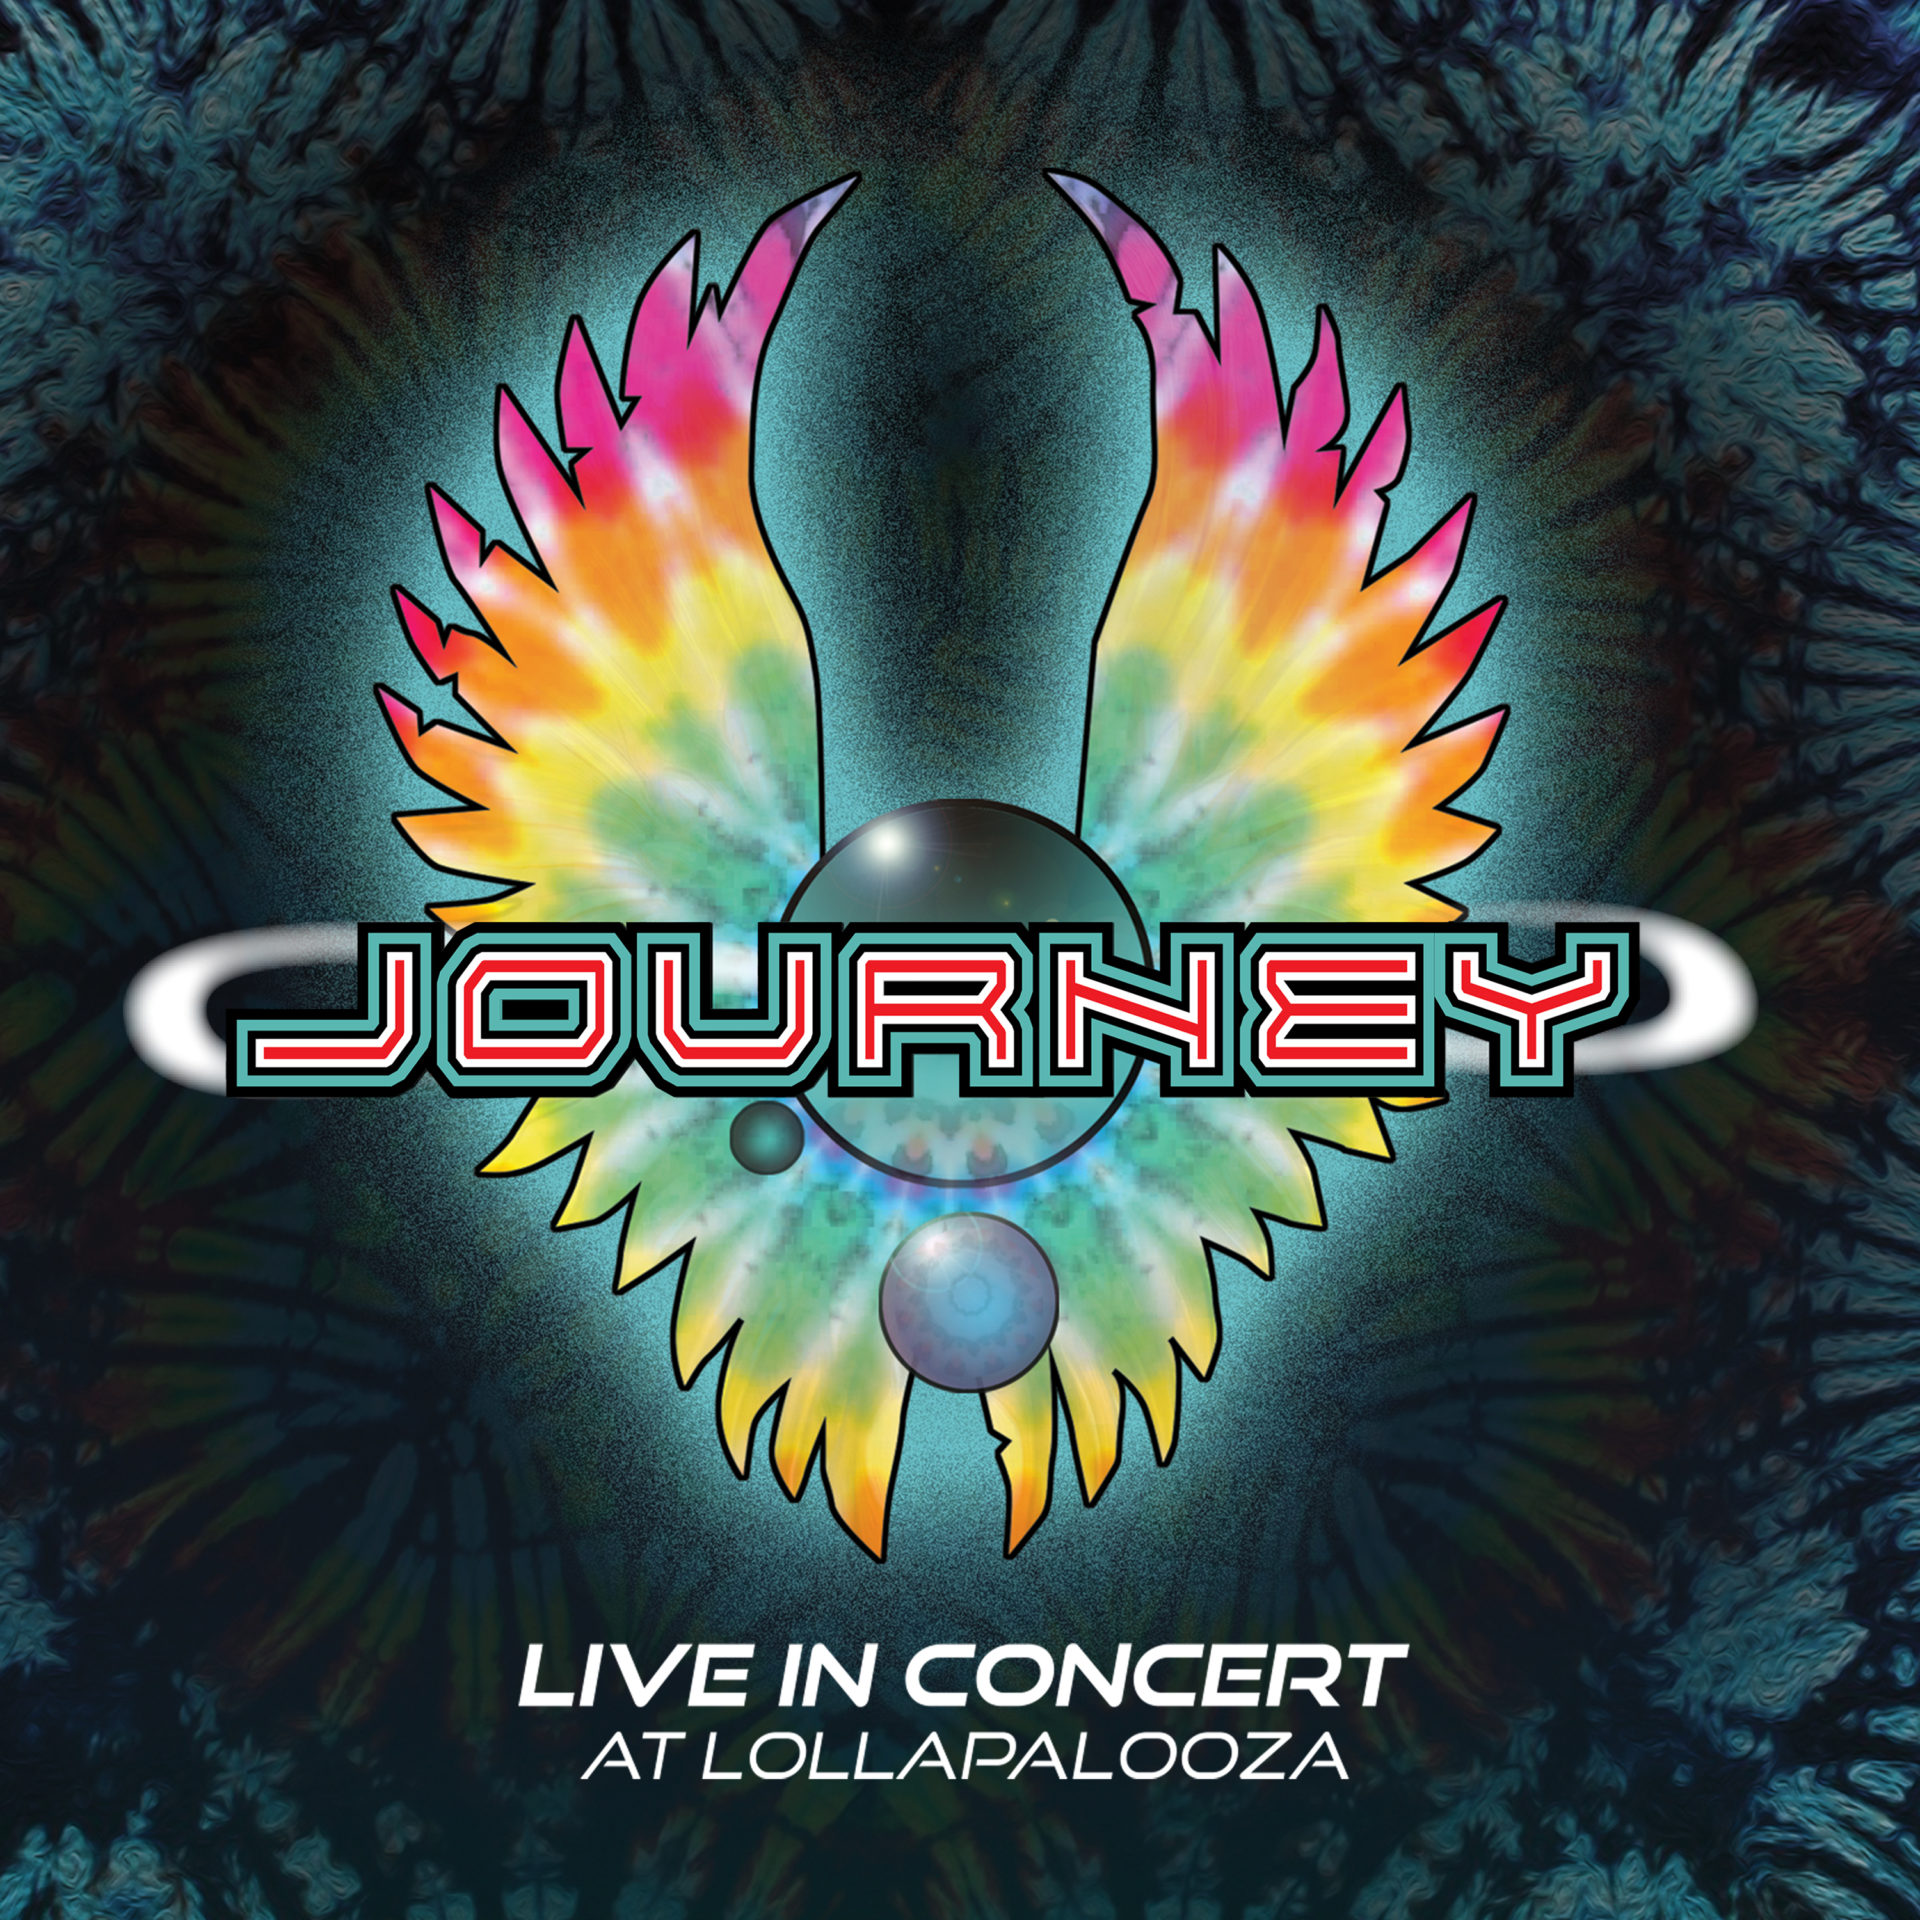 Journey – Live in Concert at Lollapalooza